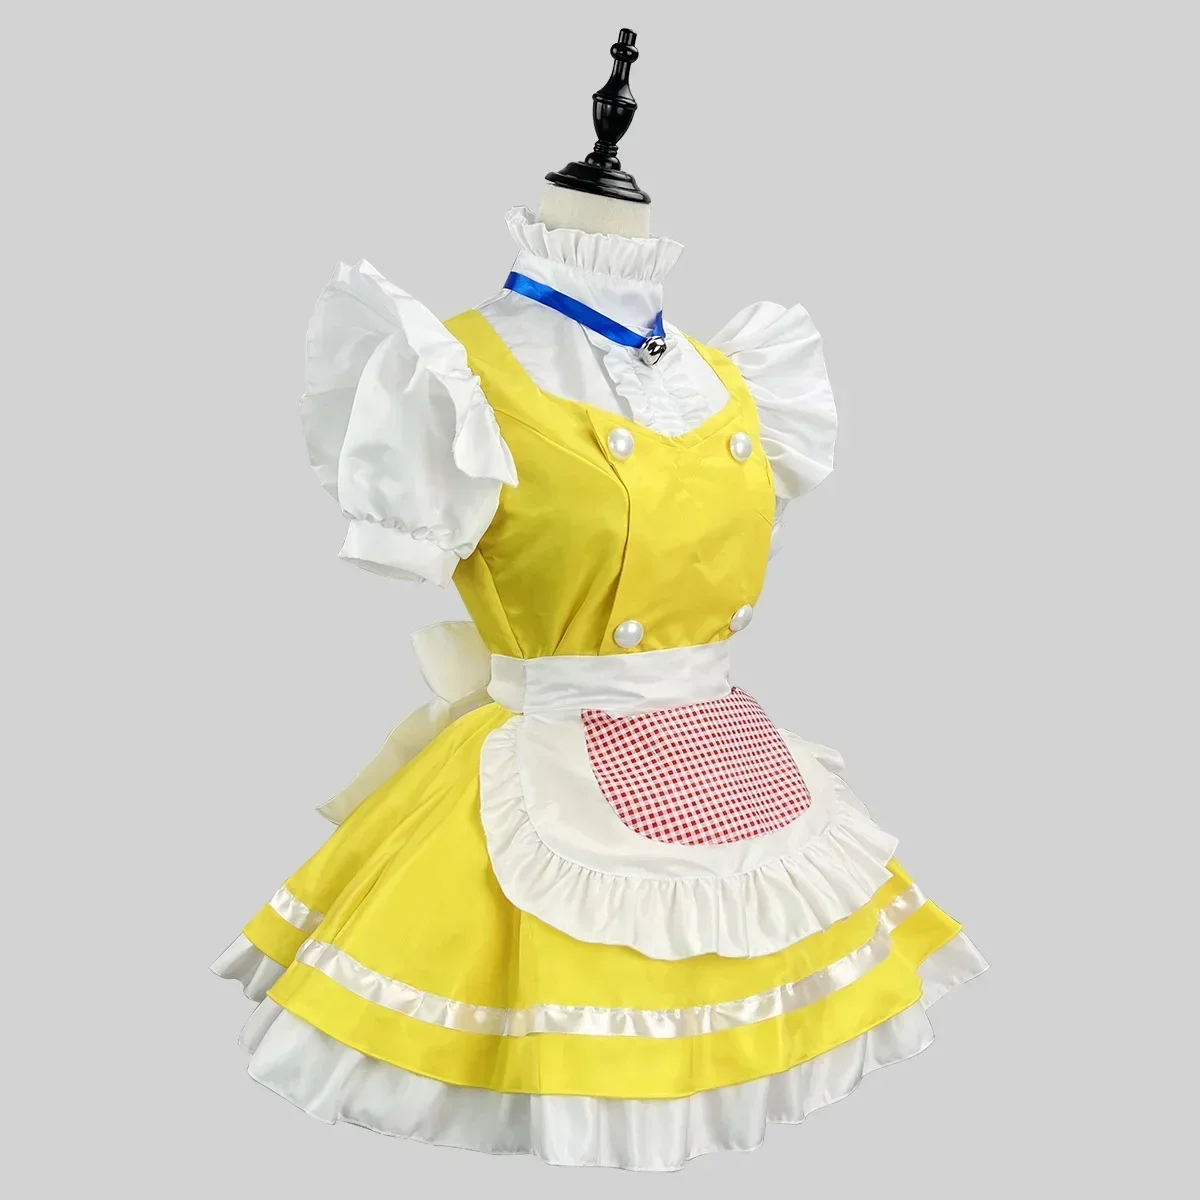 

Japanese Lovely Maid Outfit Clothes Yellow Short Skirt Women's Apron S-5XL Dress Thigh Length Role-Playing Stage Cosplay Costume